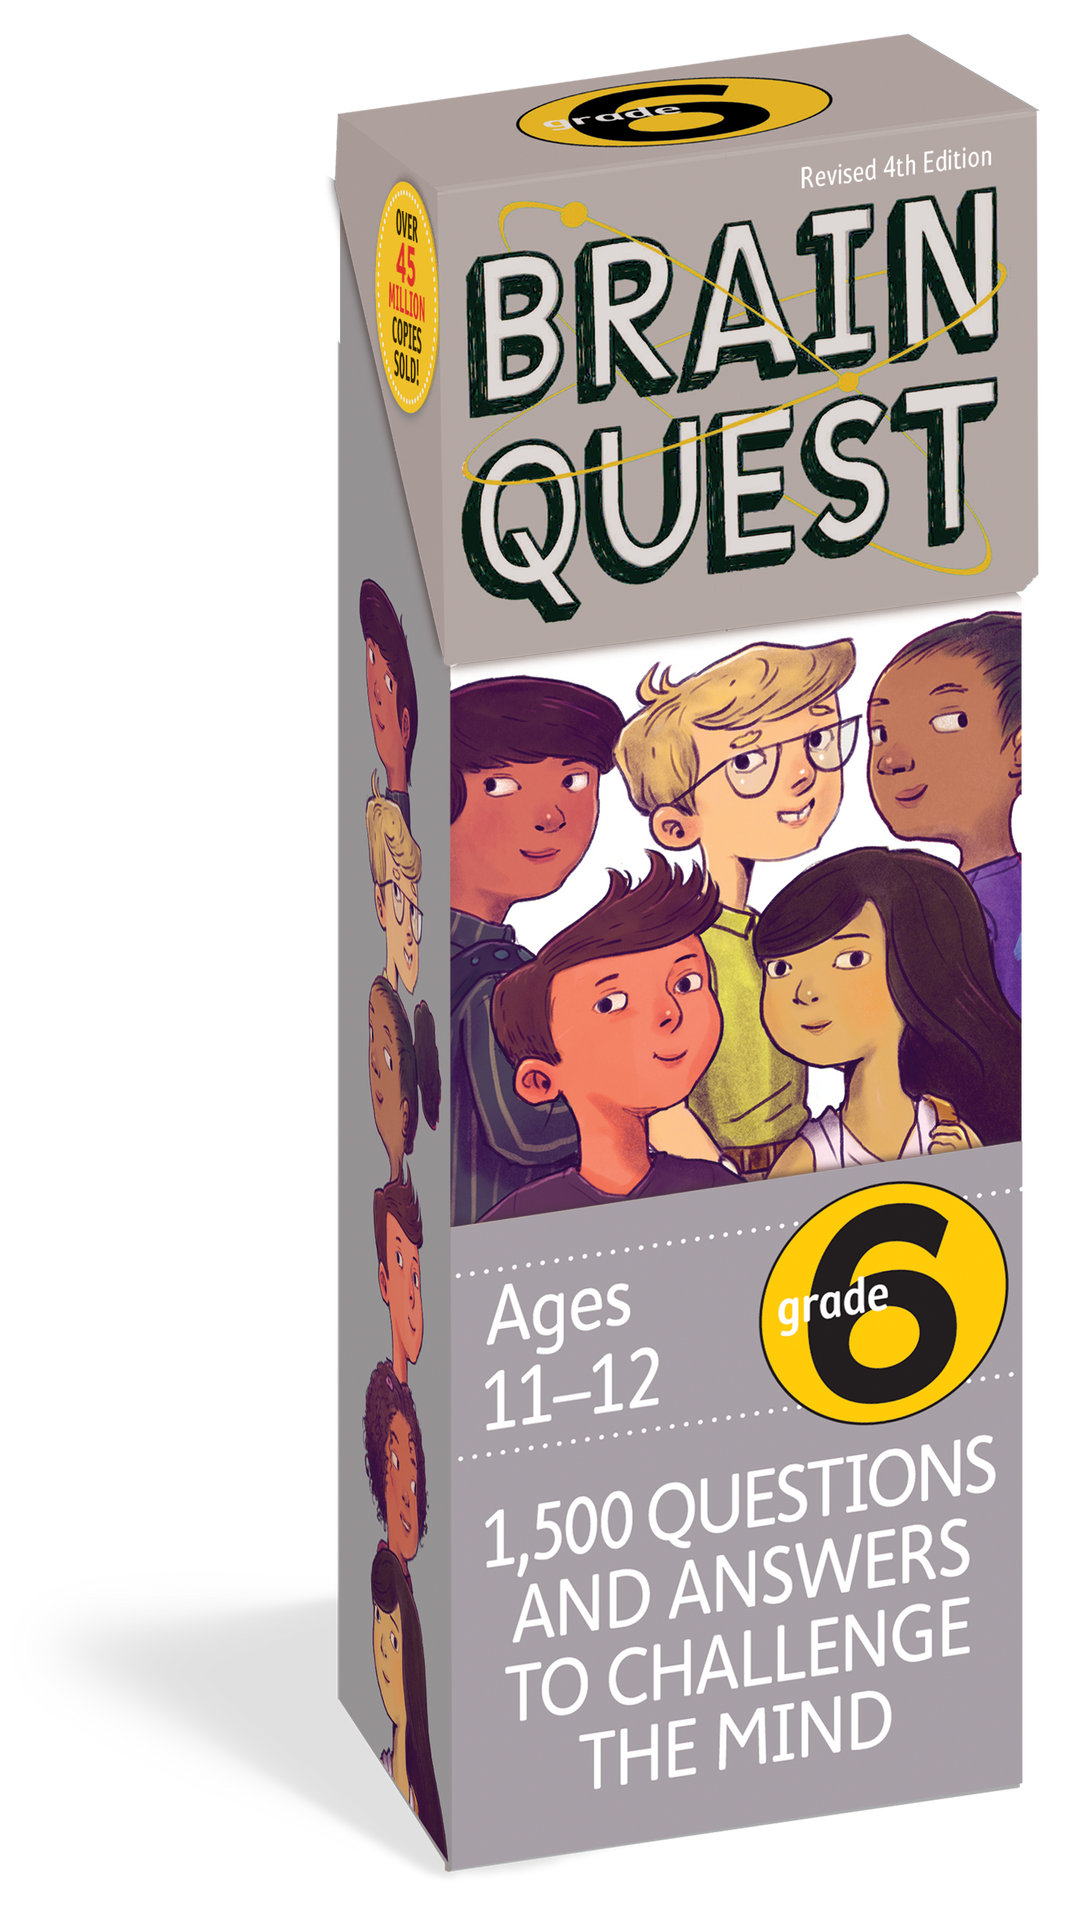 Brain Quest for 6th Grade, Revised 4th Edition